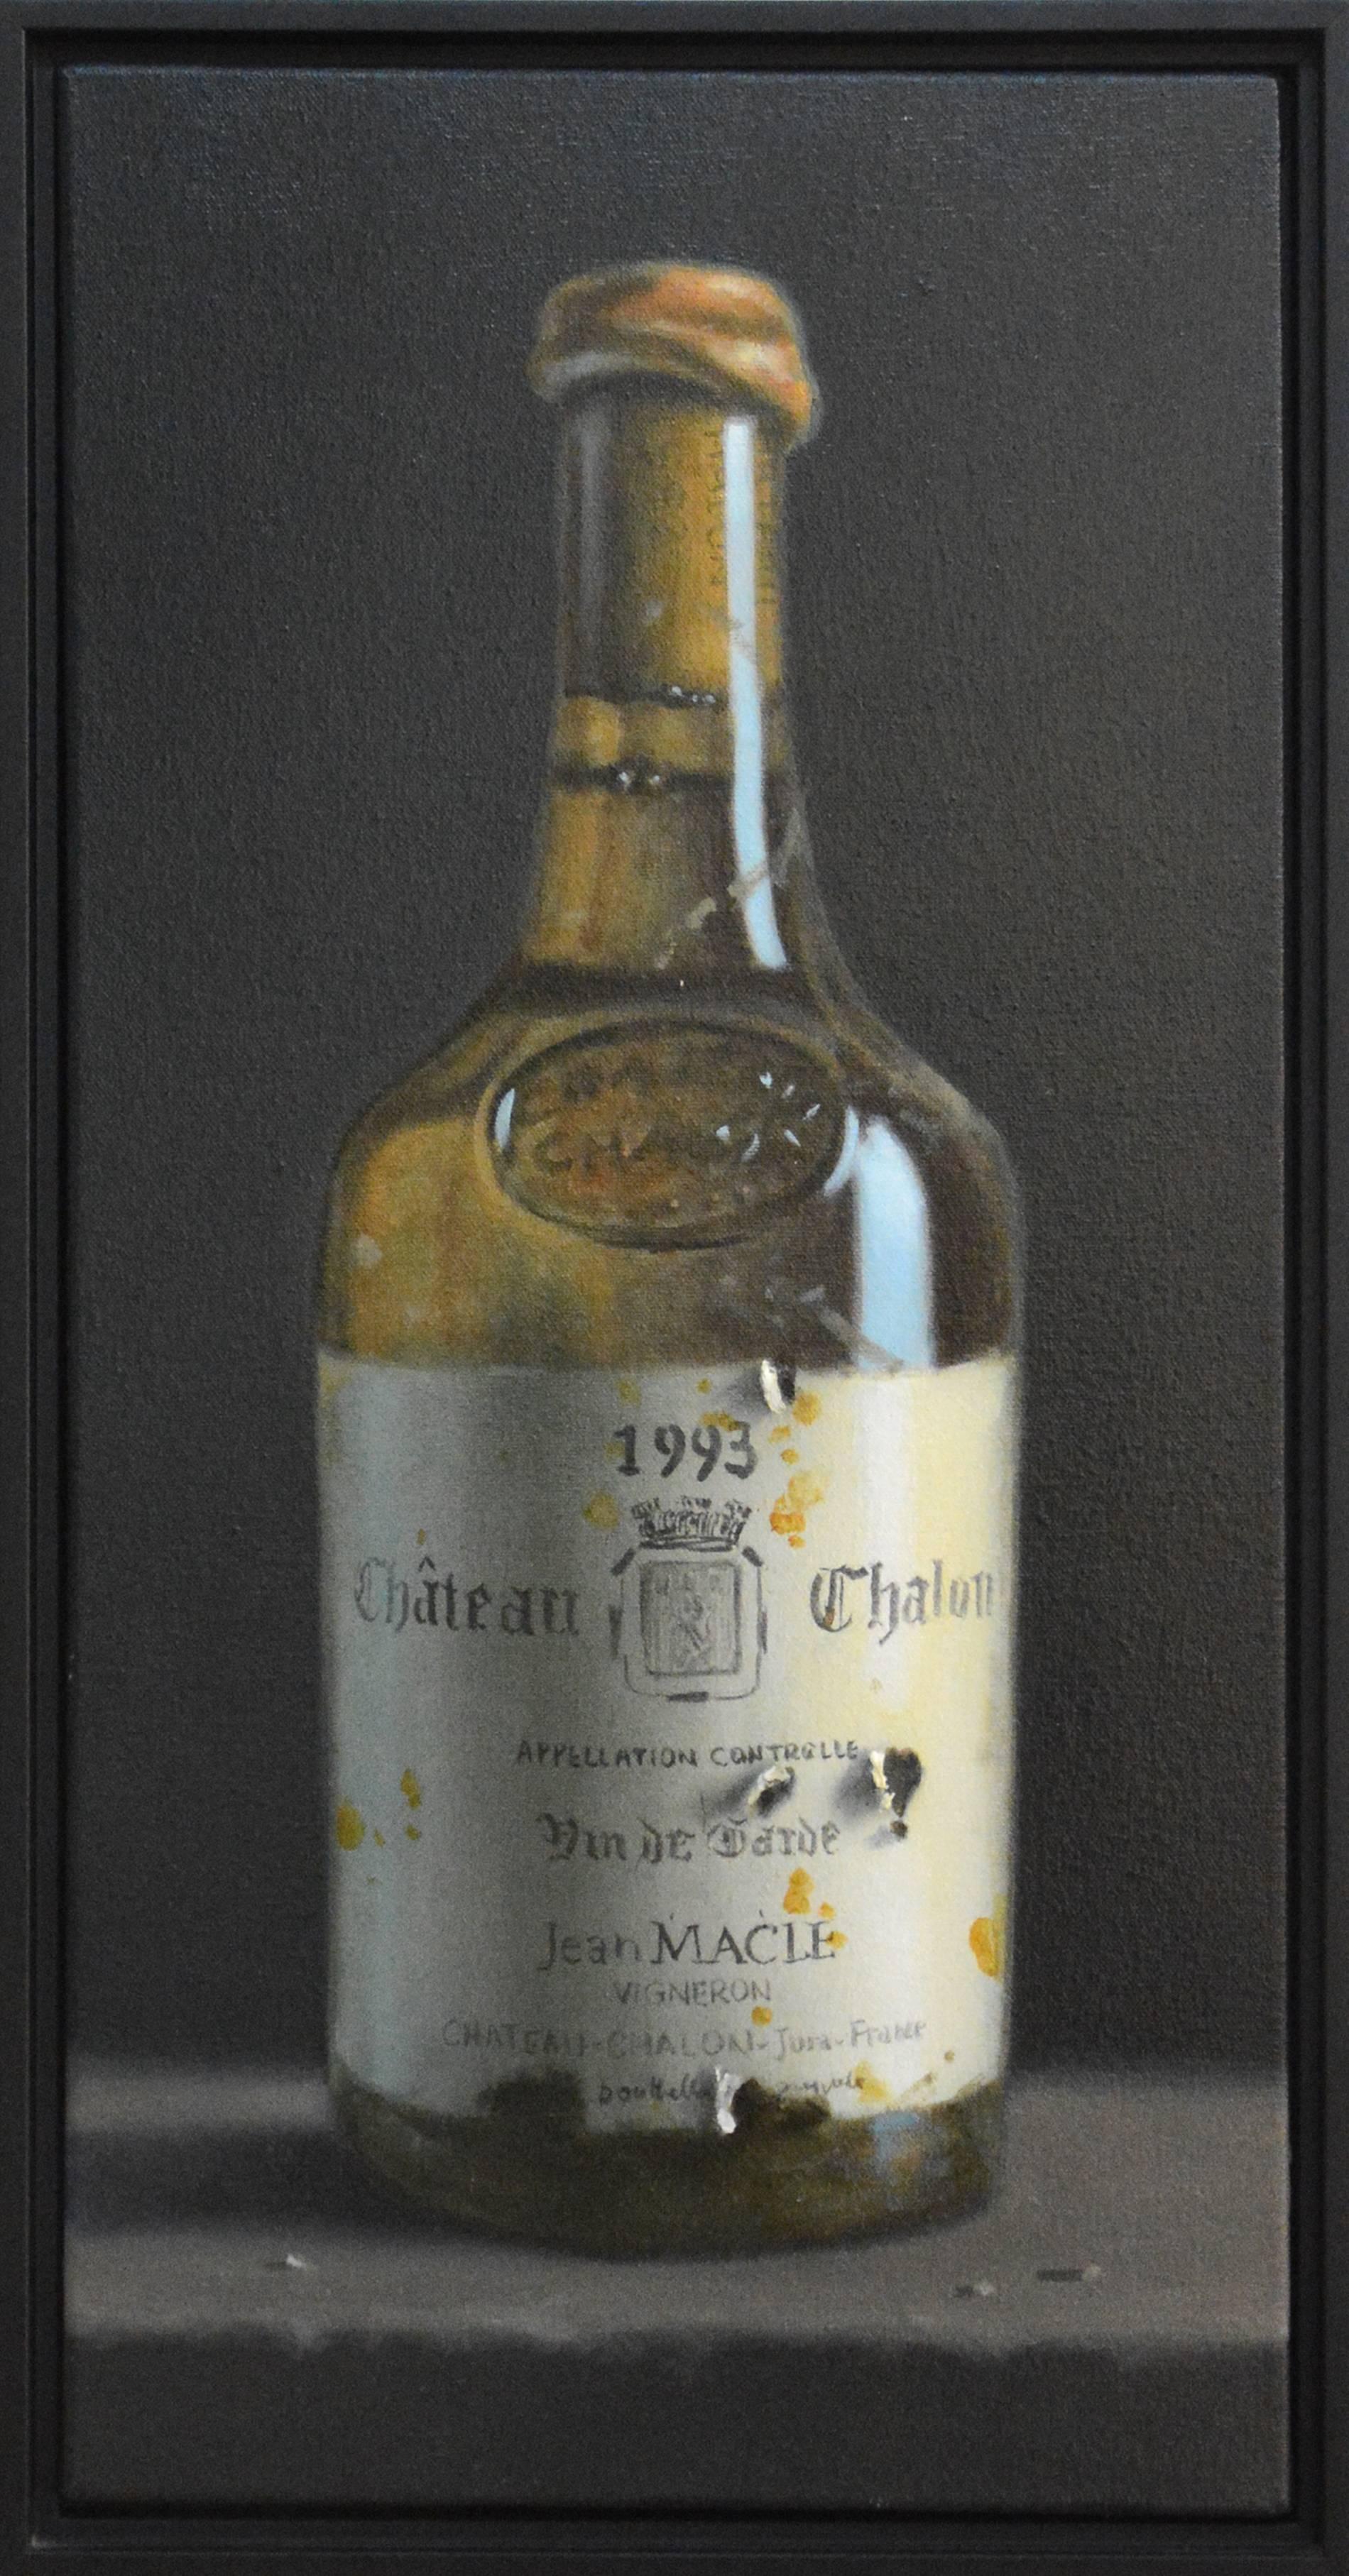 Chateau Chalon 1993 - rustic, vivid detail, realist, still-life oil on canvas